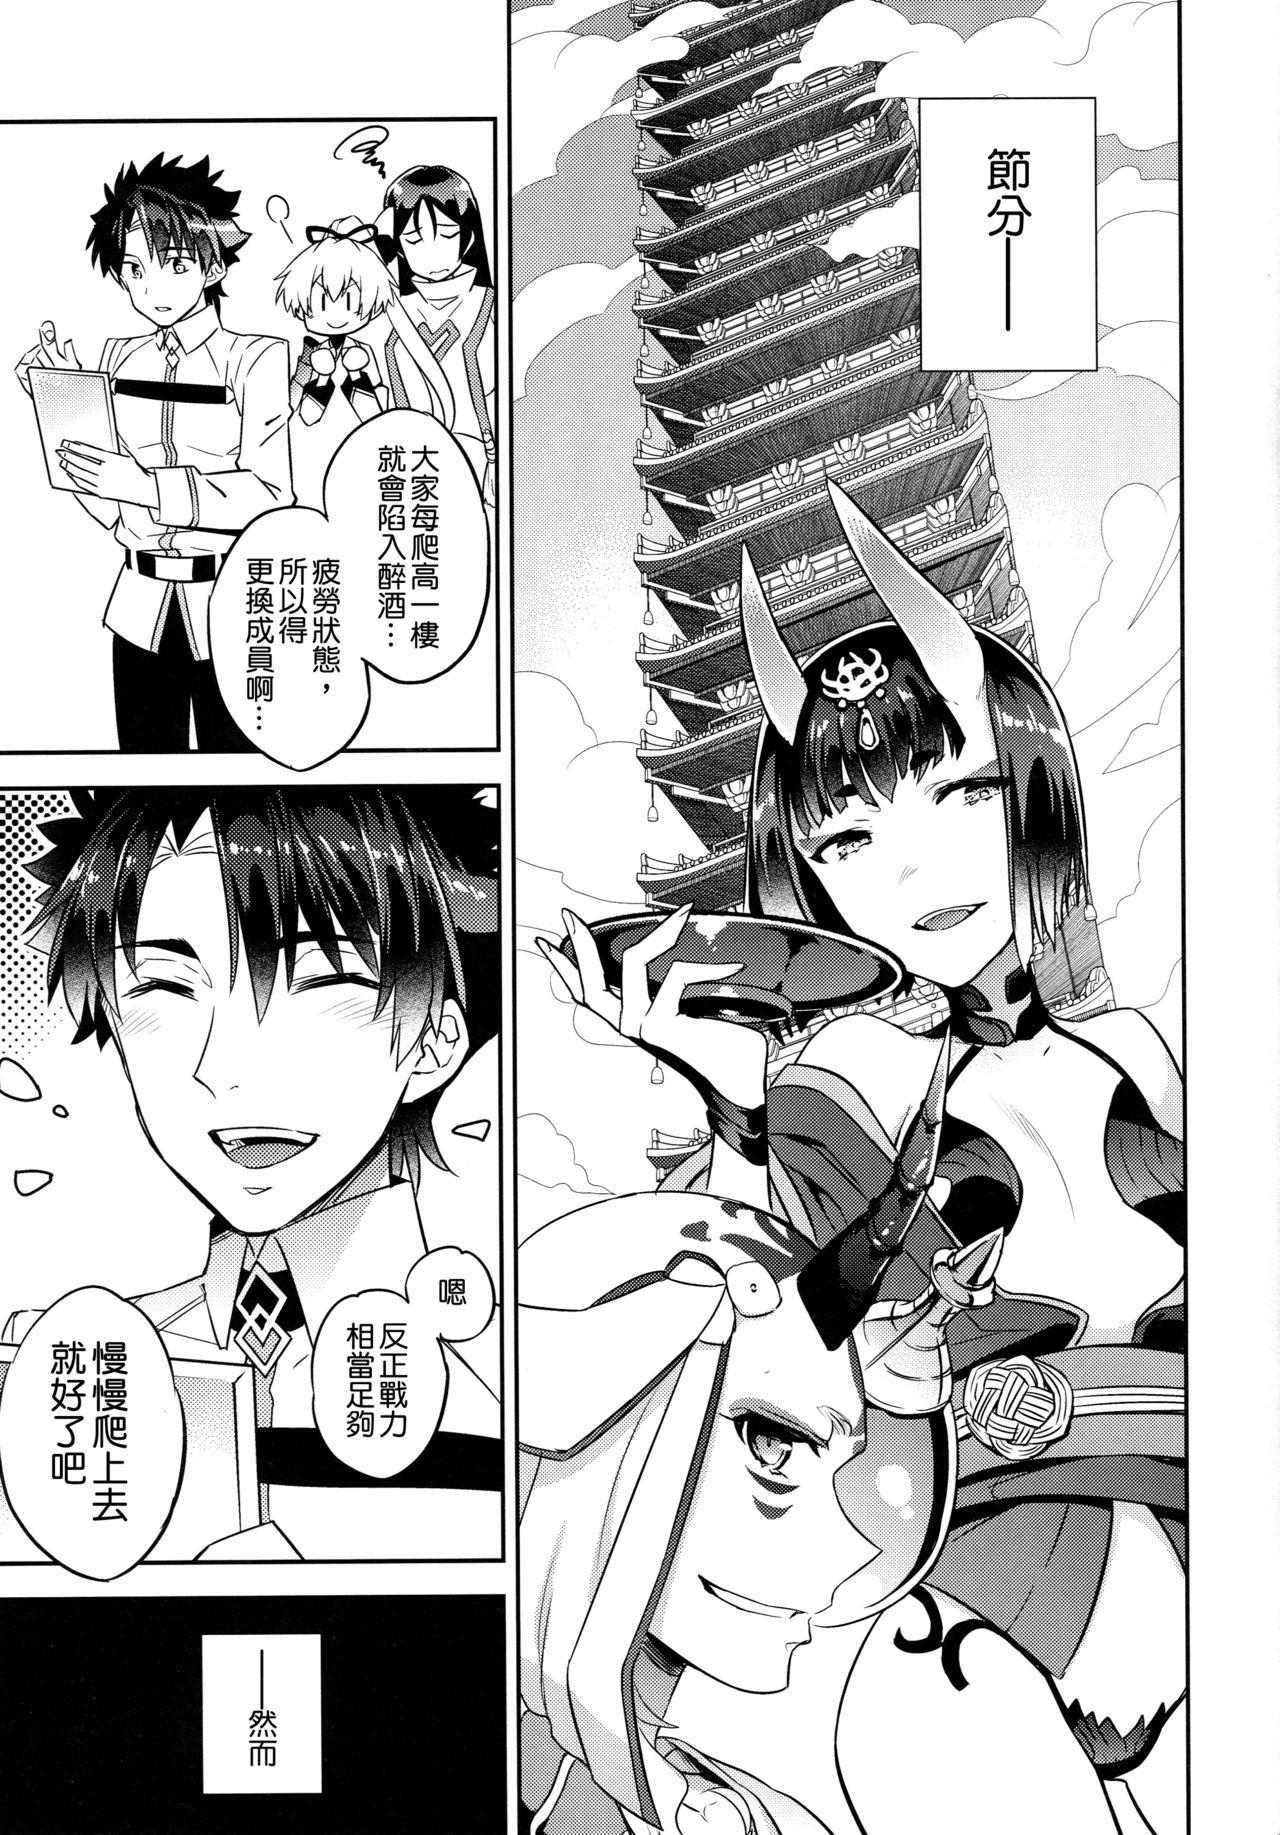 Mmf (C94) [Crazy9 (Ichitaka)] C9-36 Jeanne Alter-chan to Yopparai Onsen (Fate/Grand Order) [Chinese] [空気系☆漢化] - Fate grand order Jerkoff - Page 4